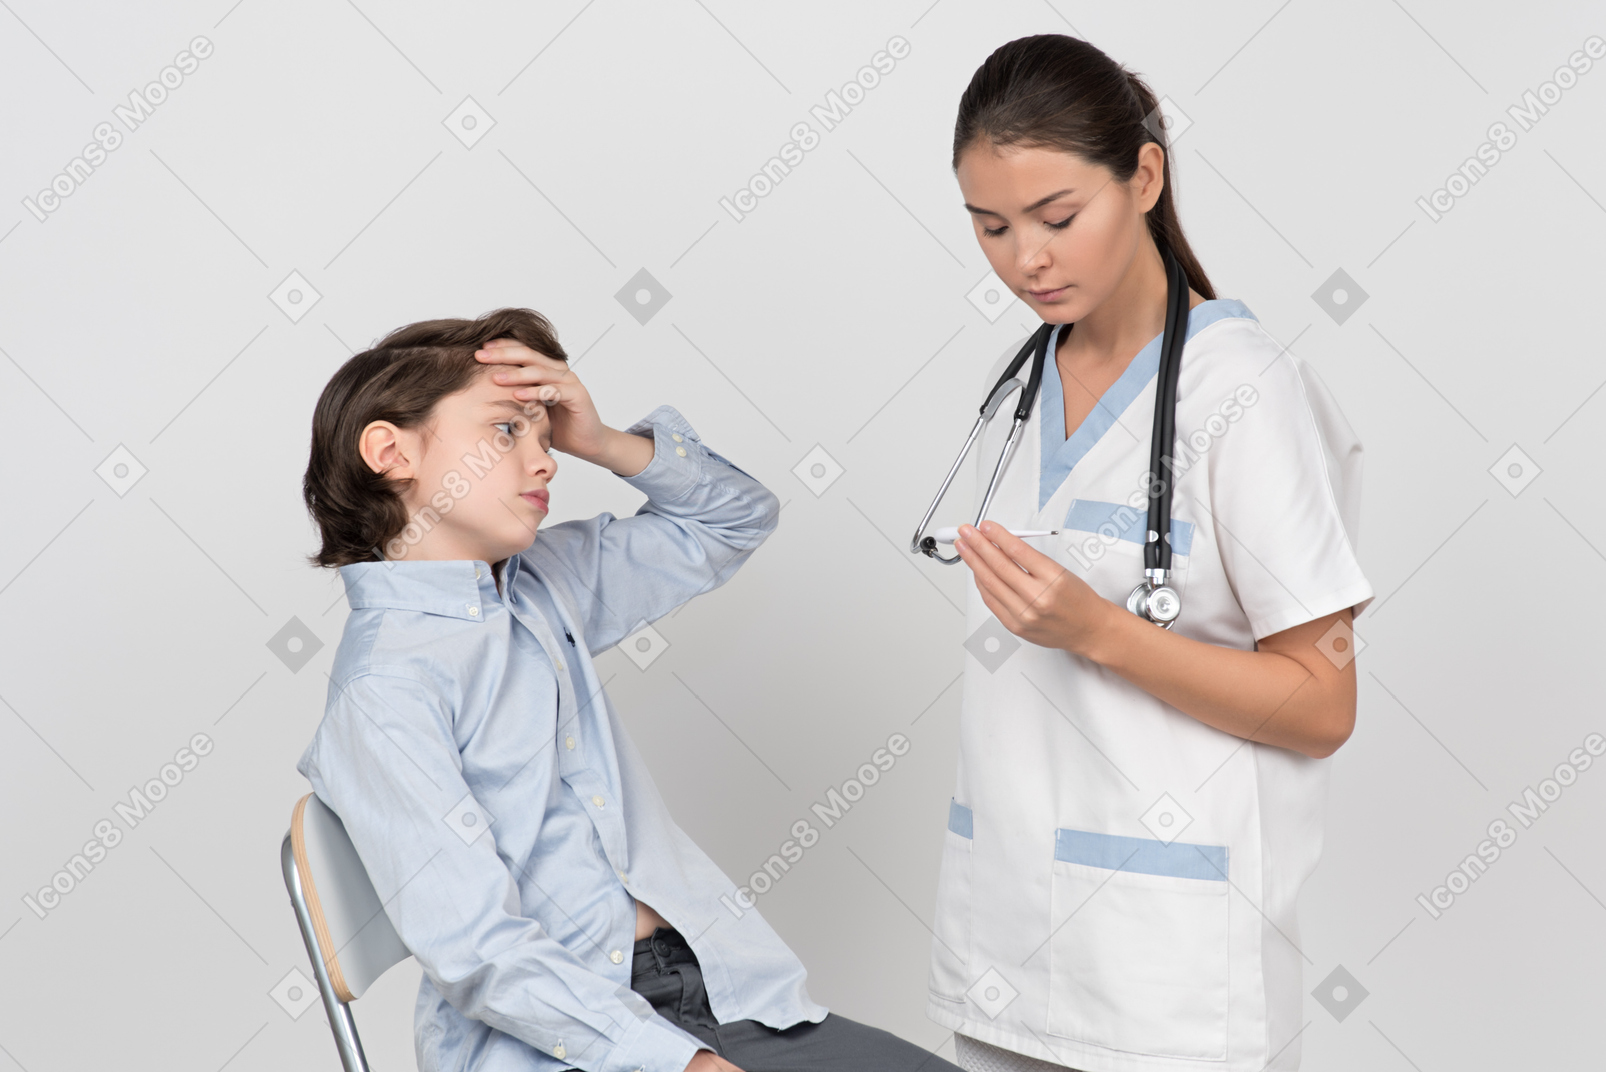 Female doctor looking on thermometer while kid patient is touching his forehead